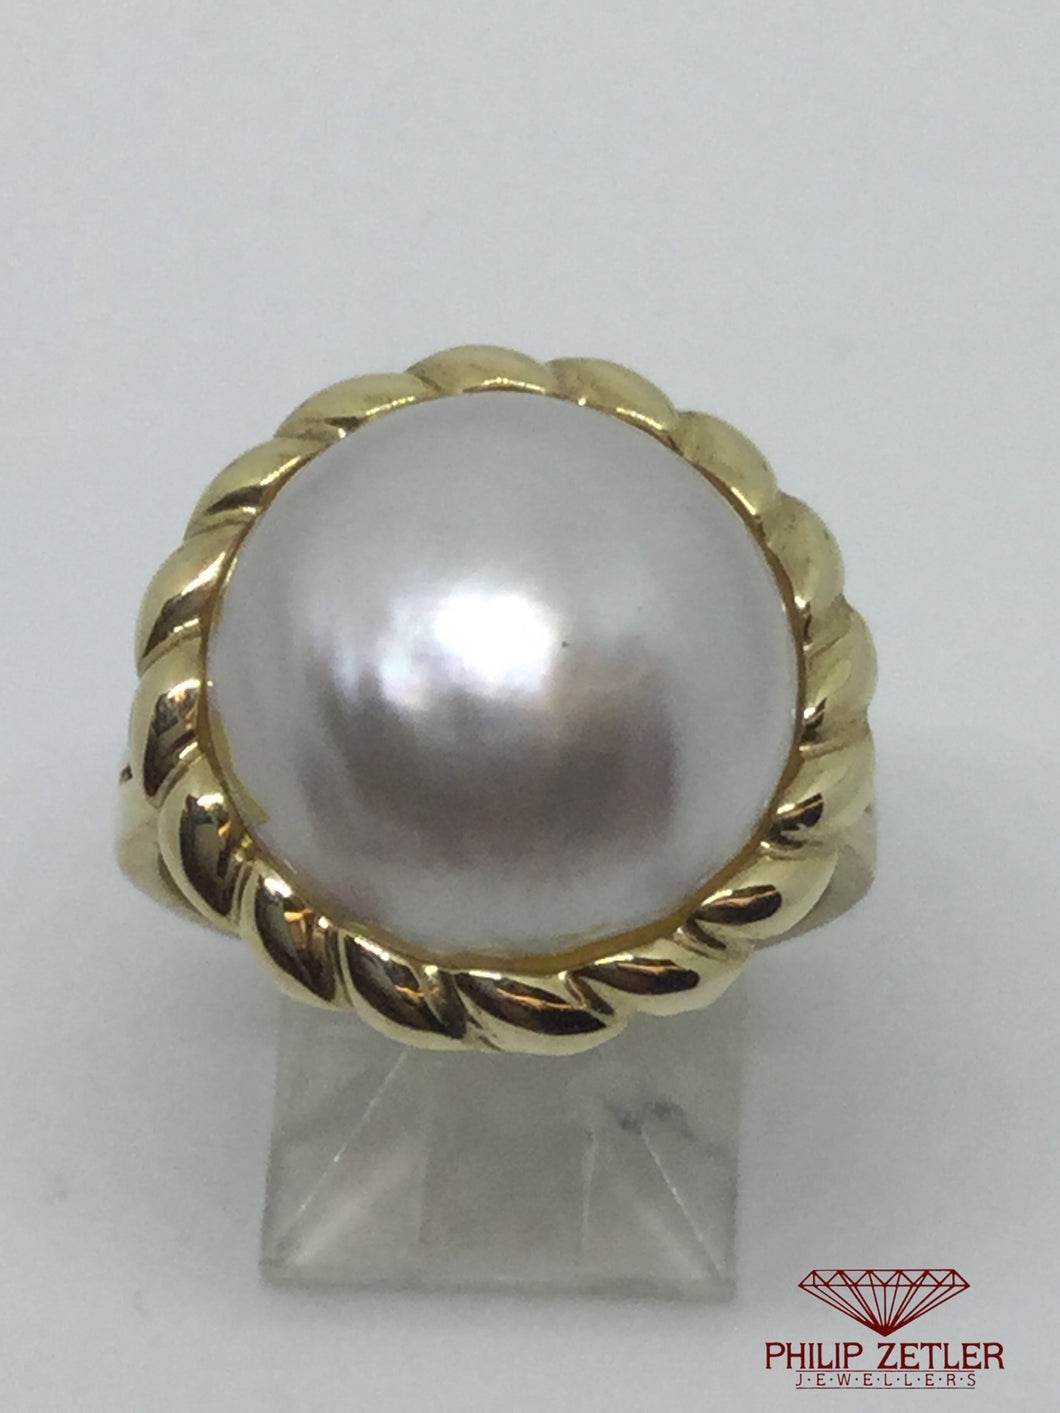 9ct Mabe Pearl Ring